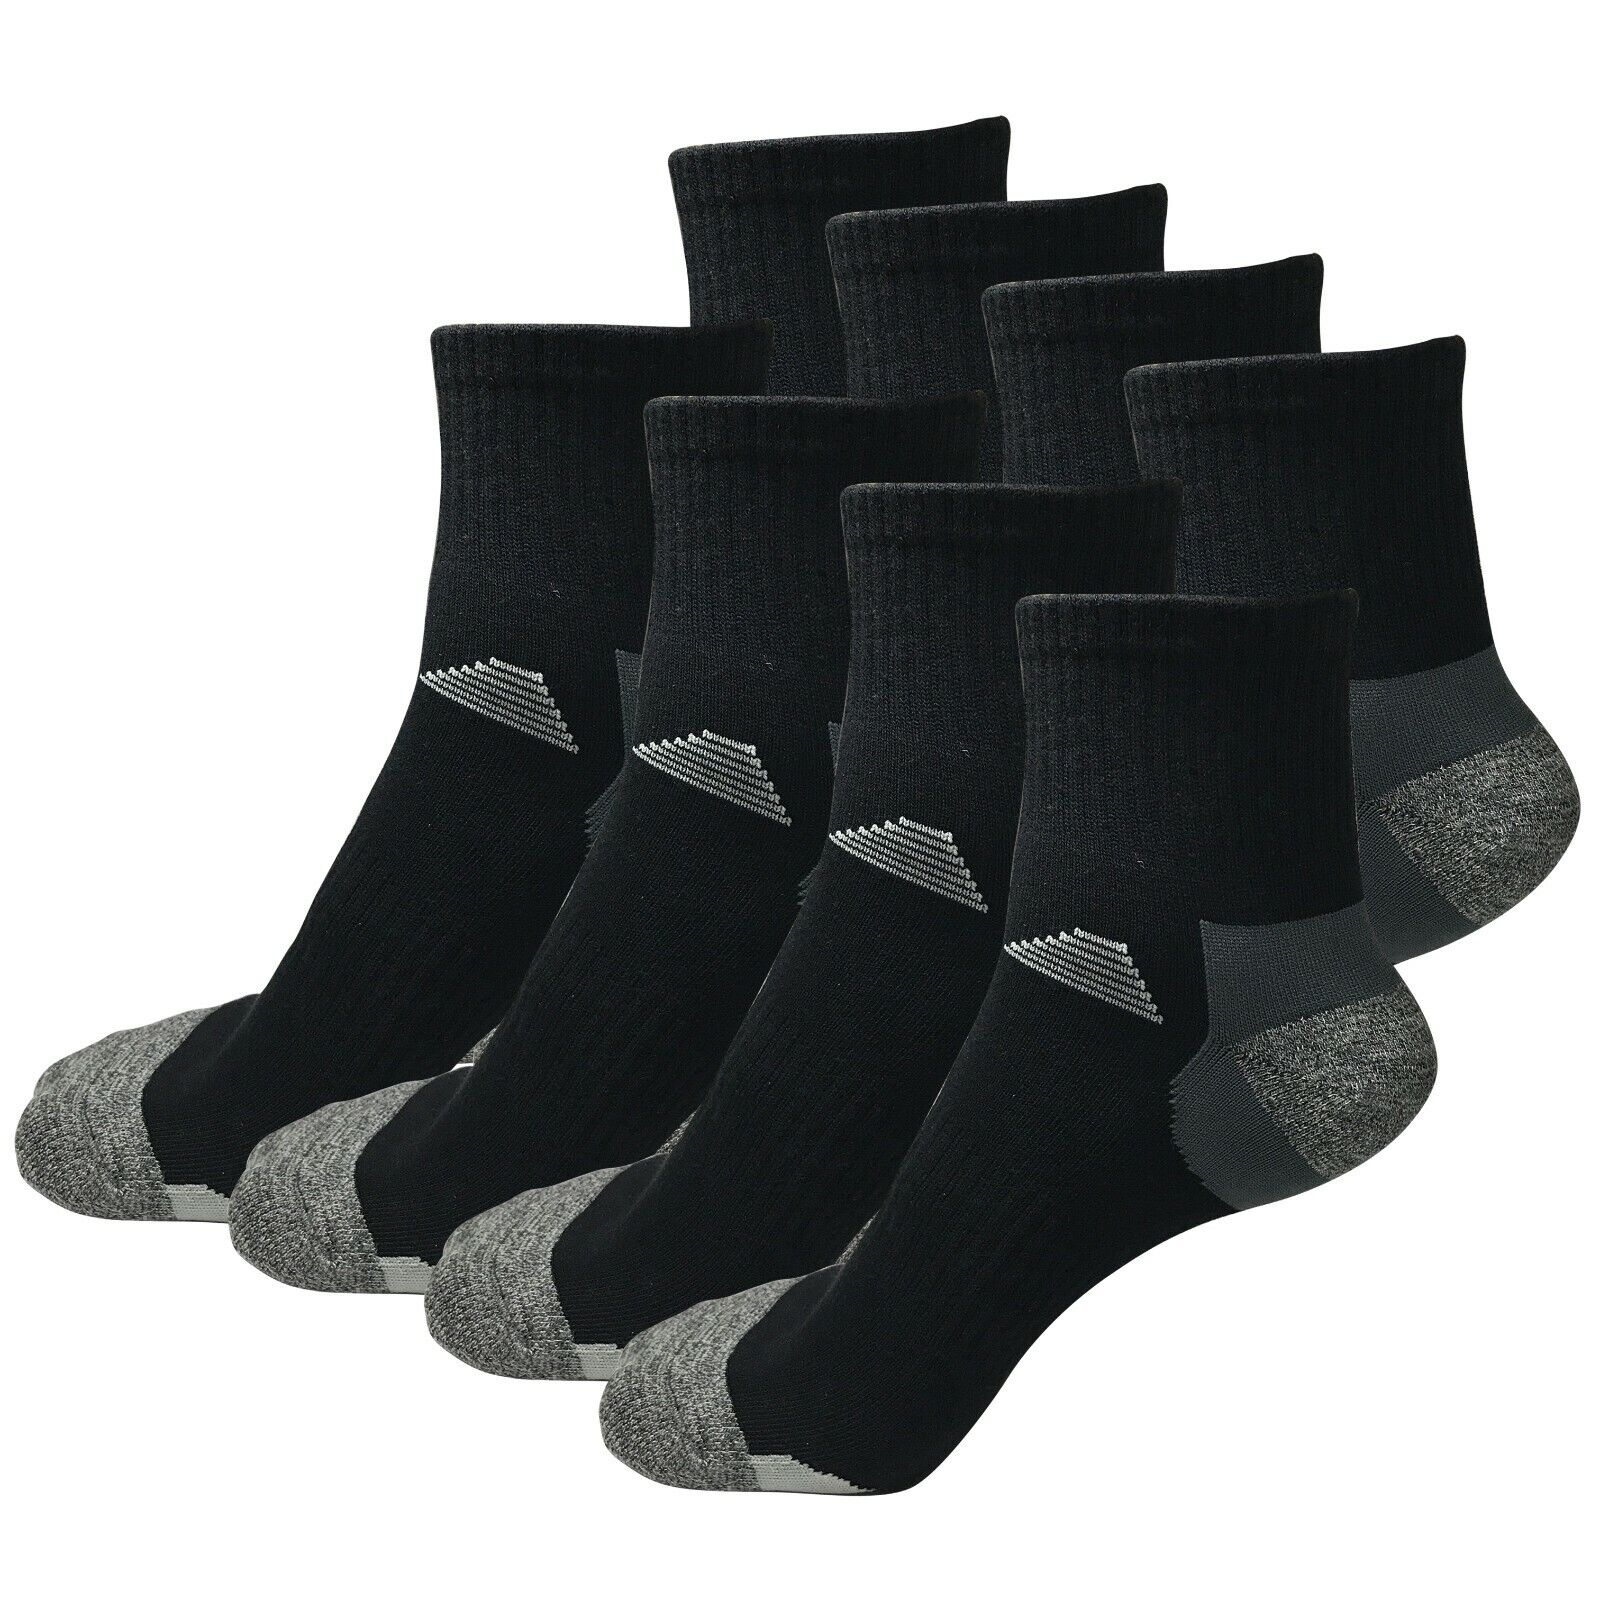 8 Pairs Mens Mid Cut Ankle Quarter Athletic Casual Sport Cotton Socks Size 6-12